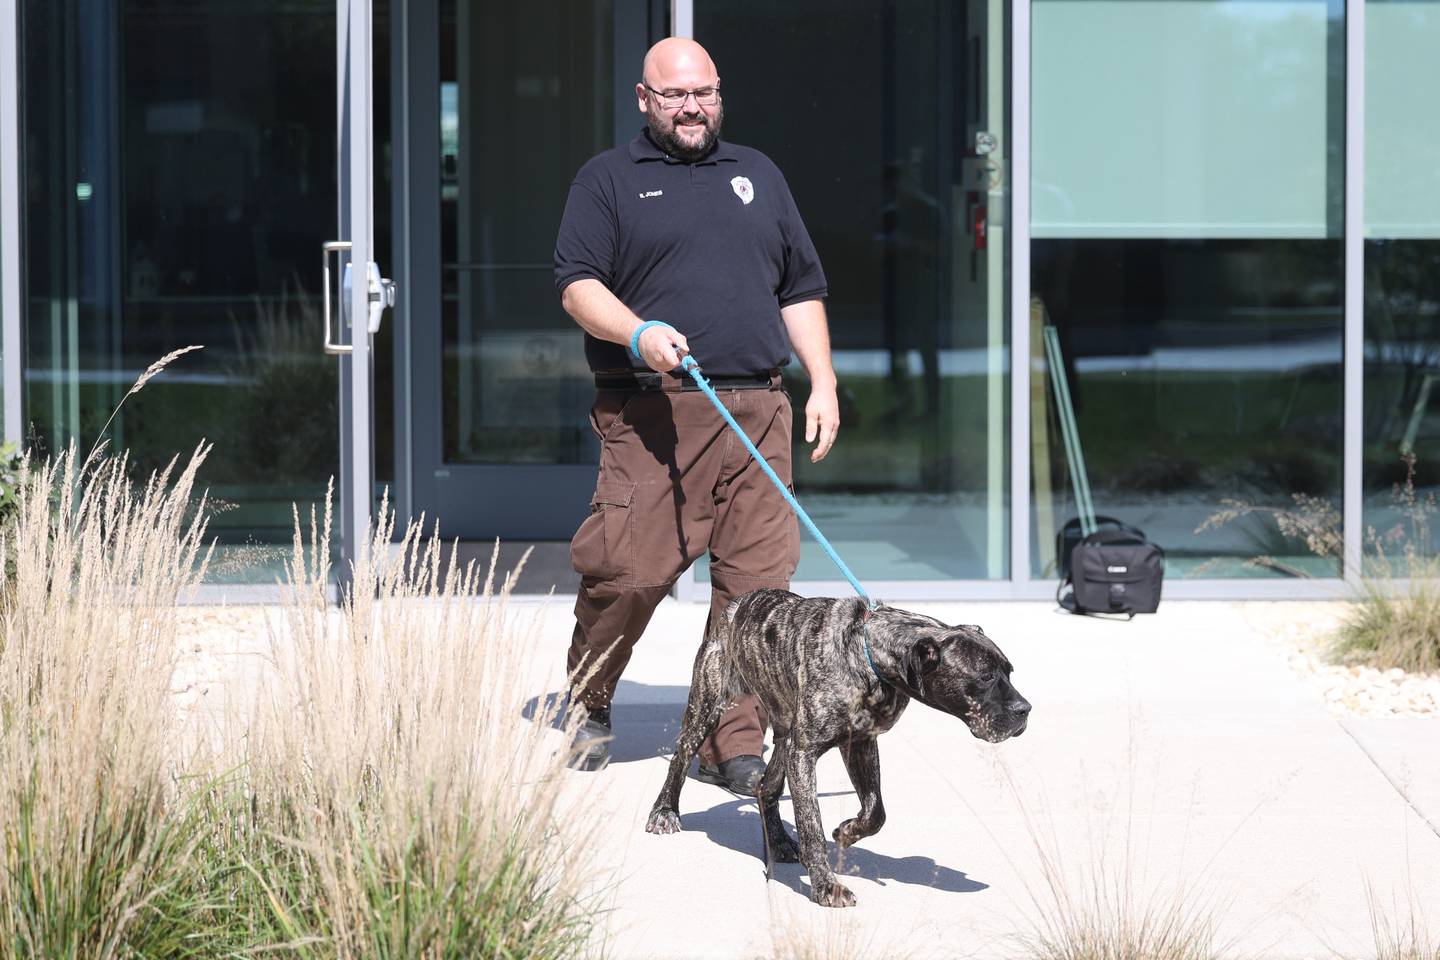 Animal Control Officer Bryan Jones brings out Hermione from inside the Will County Animal Control facility on Tuesday, Oct. 3, 2023 in Joliet. The English Mastiff was found in an unincorporated area near Beecher with gunshot wounds.